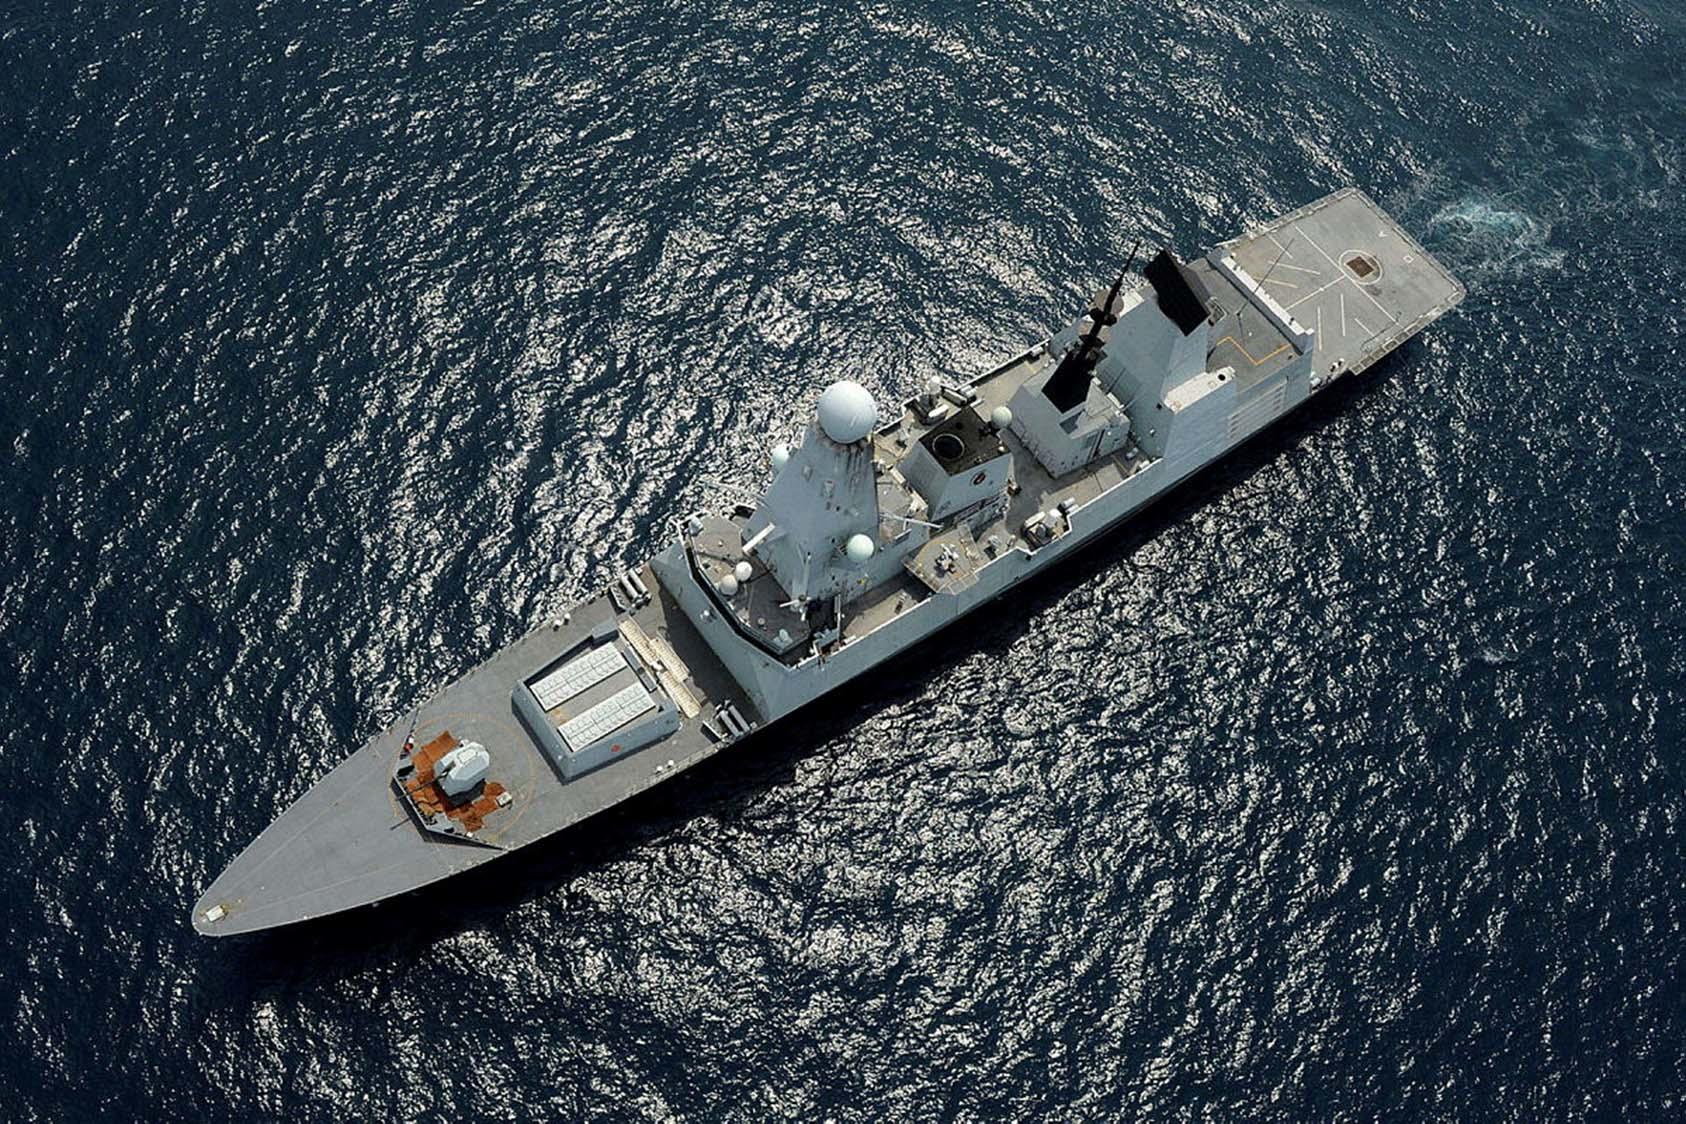 Royal Navy destroyer HMS Daring in the South China Sea. October 11, 2013. Amid China’s rise, Europe has more clearly recognized the security challenges posed by Beijing and the threat to international rules and norms presented by its behavior in the South China Sea. (Keith Morgan/ U.K. Ministry of Defence)